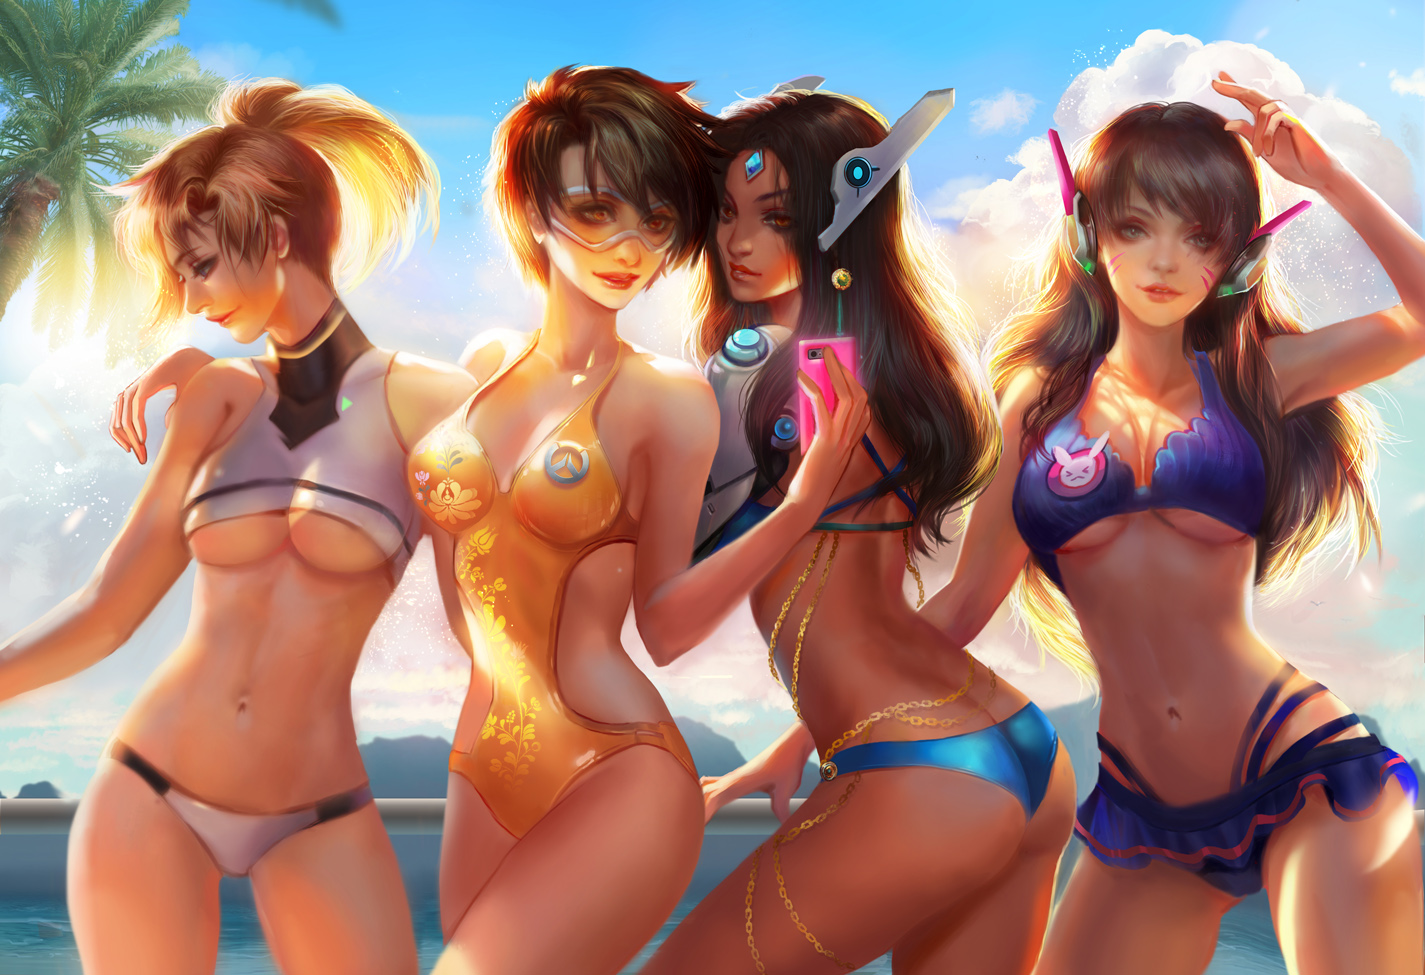 Sexy Overwatch Babes at the Beach